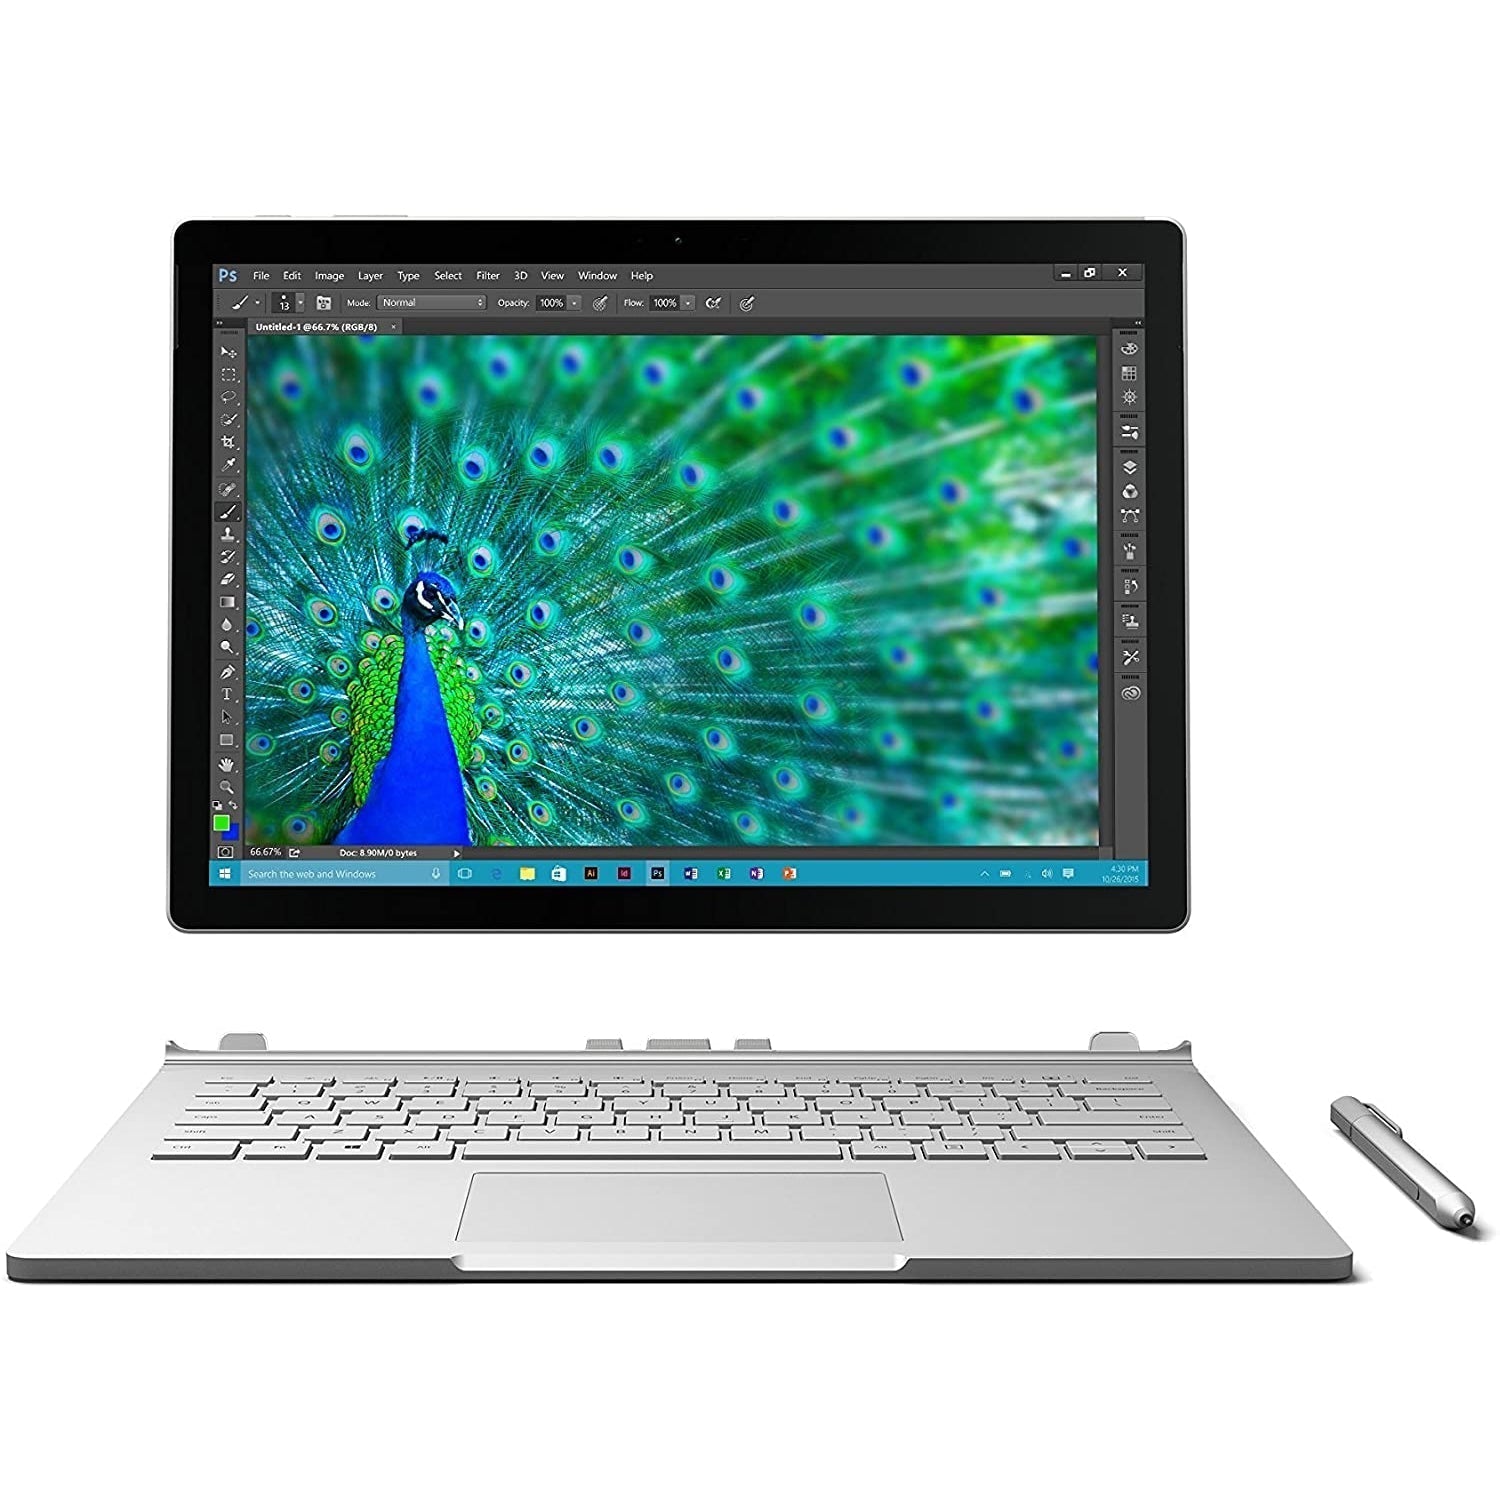 Microsoft Surface Book CR9-00002 13.5" Laptop Intel Core i5 8GB RAM 128GB SSD - Silver - Refurbished Excellent